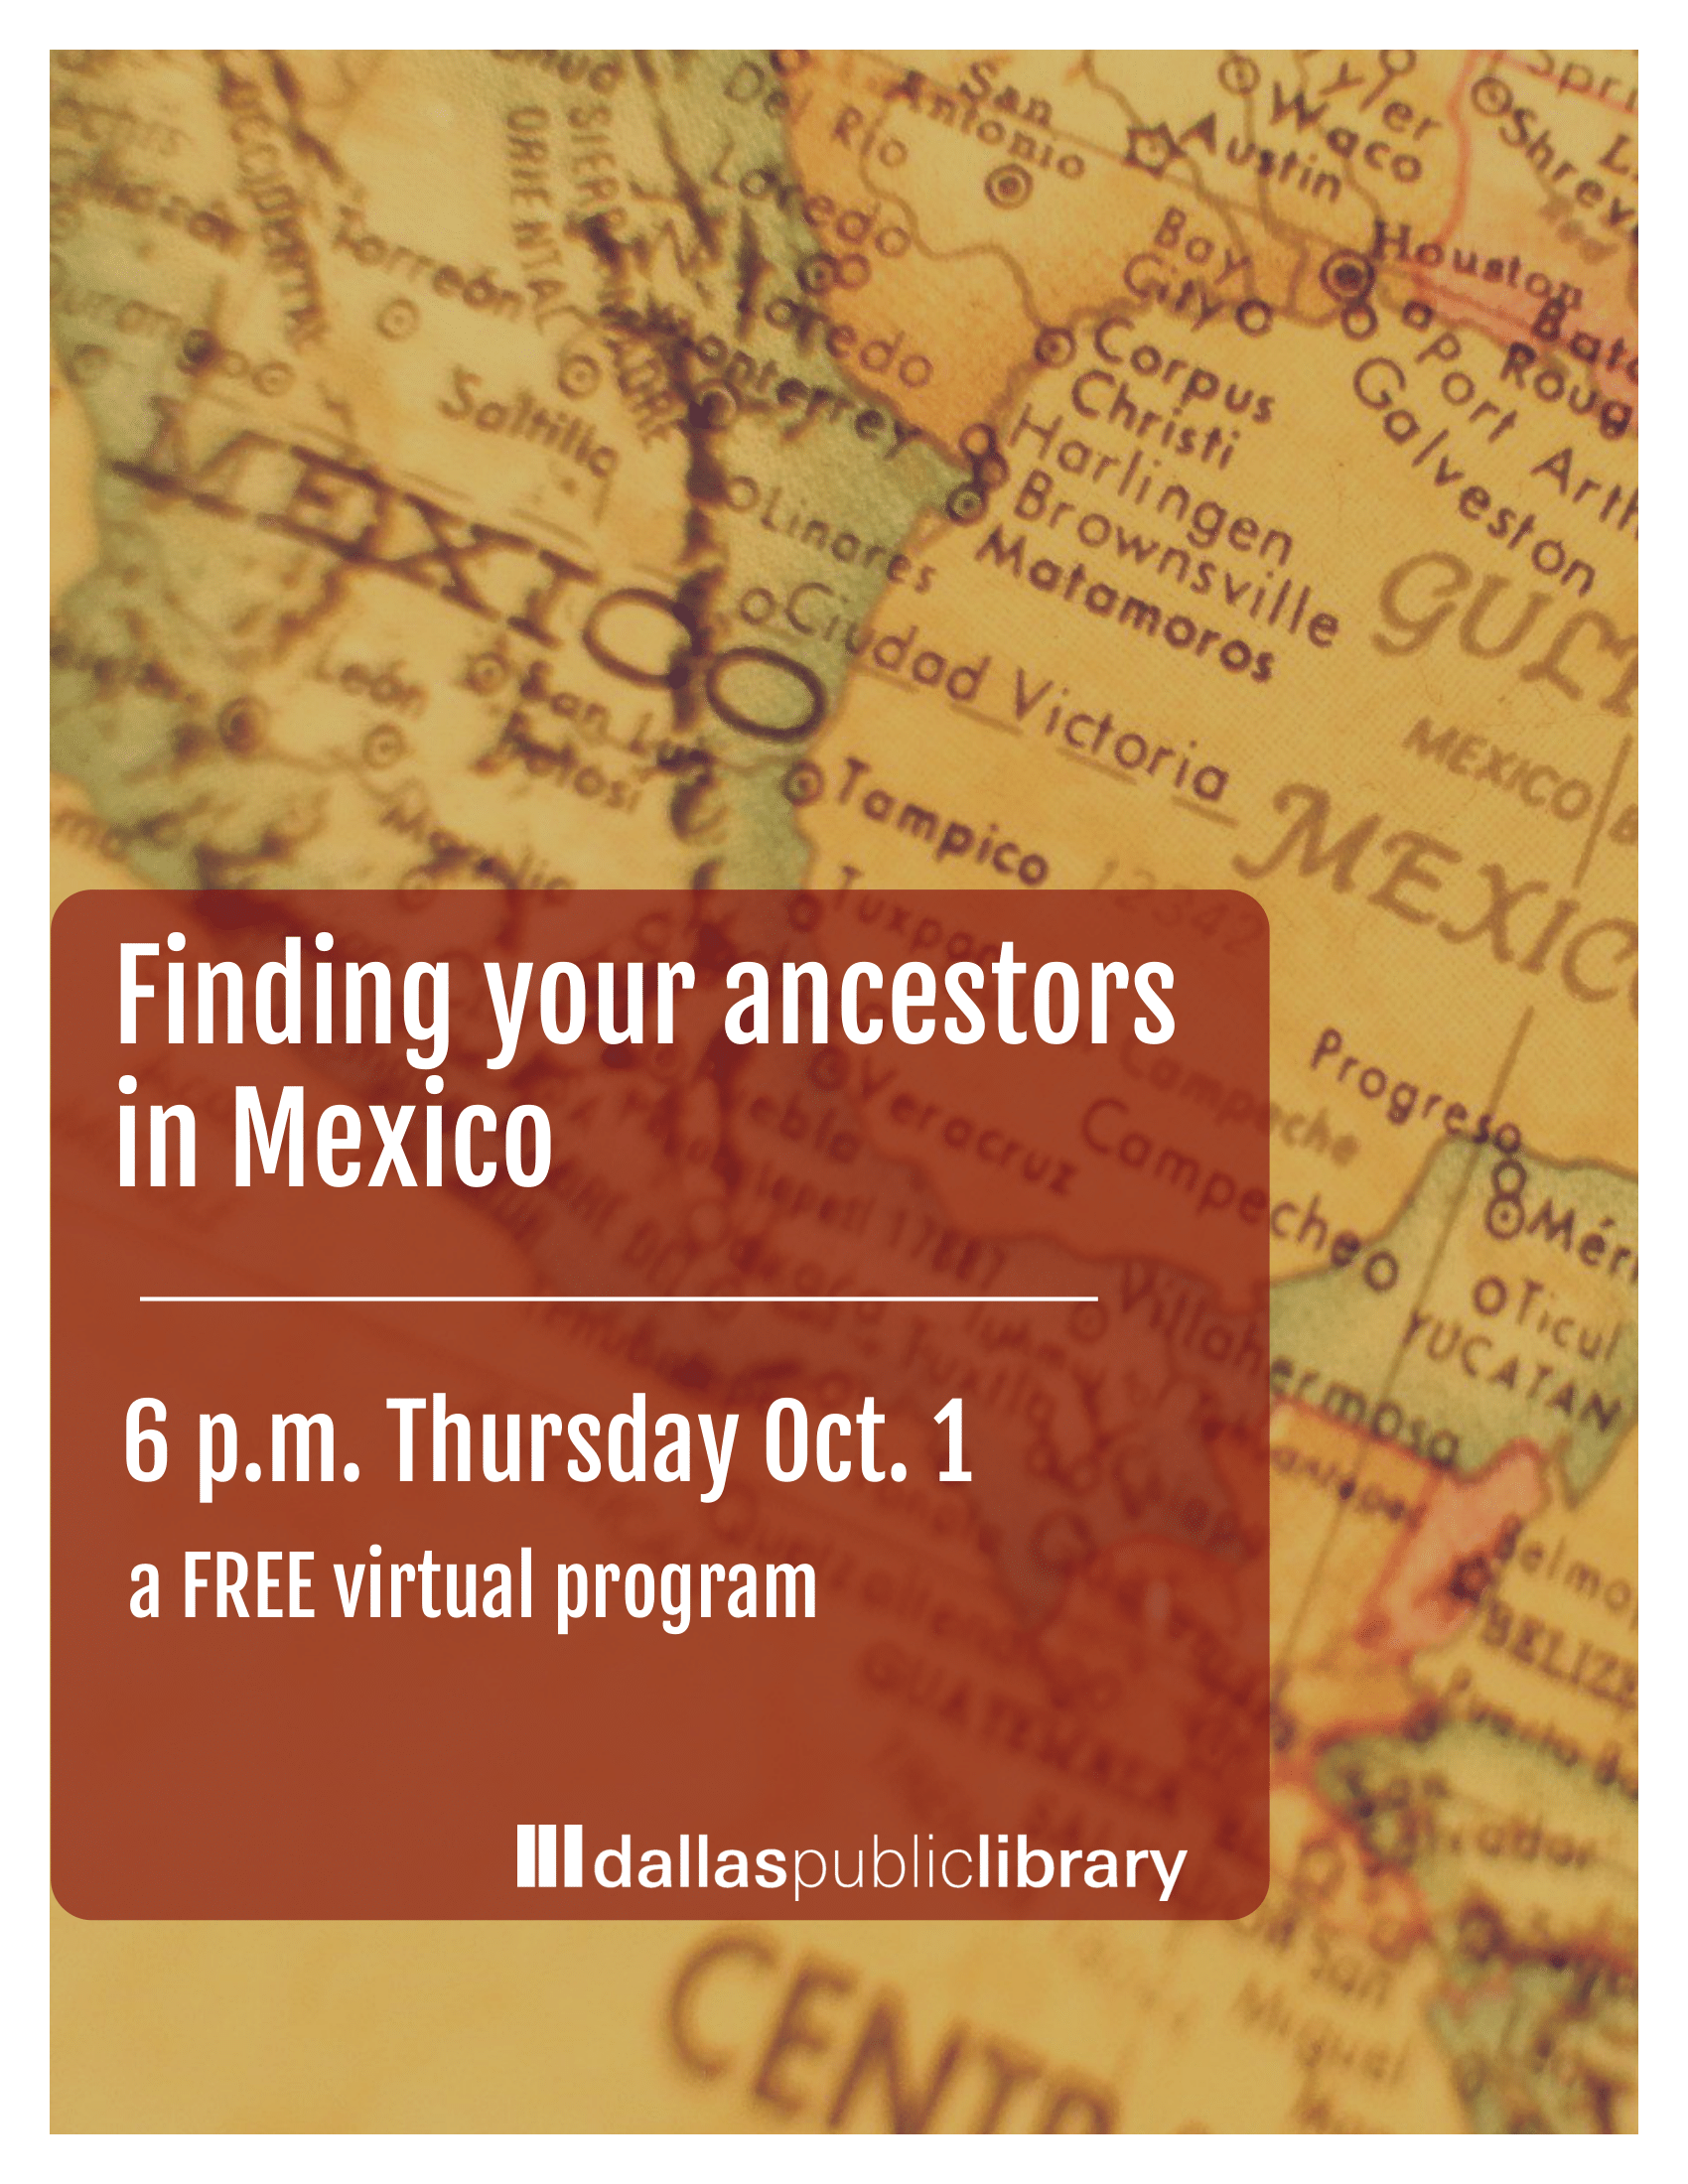 Finding your ancestors in Mexico